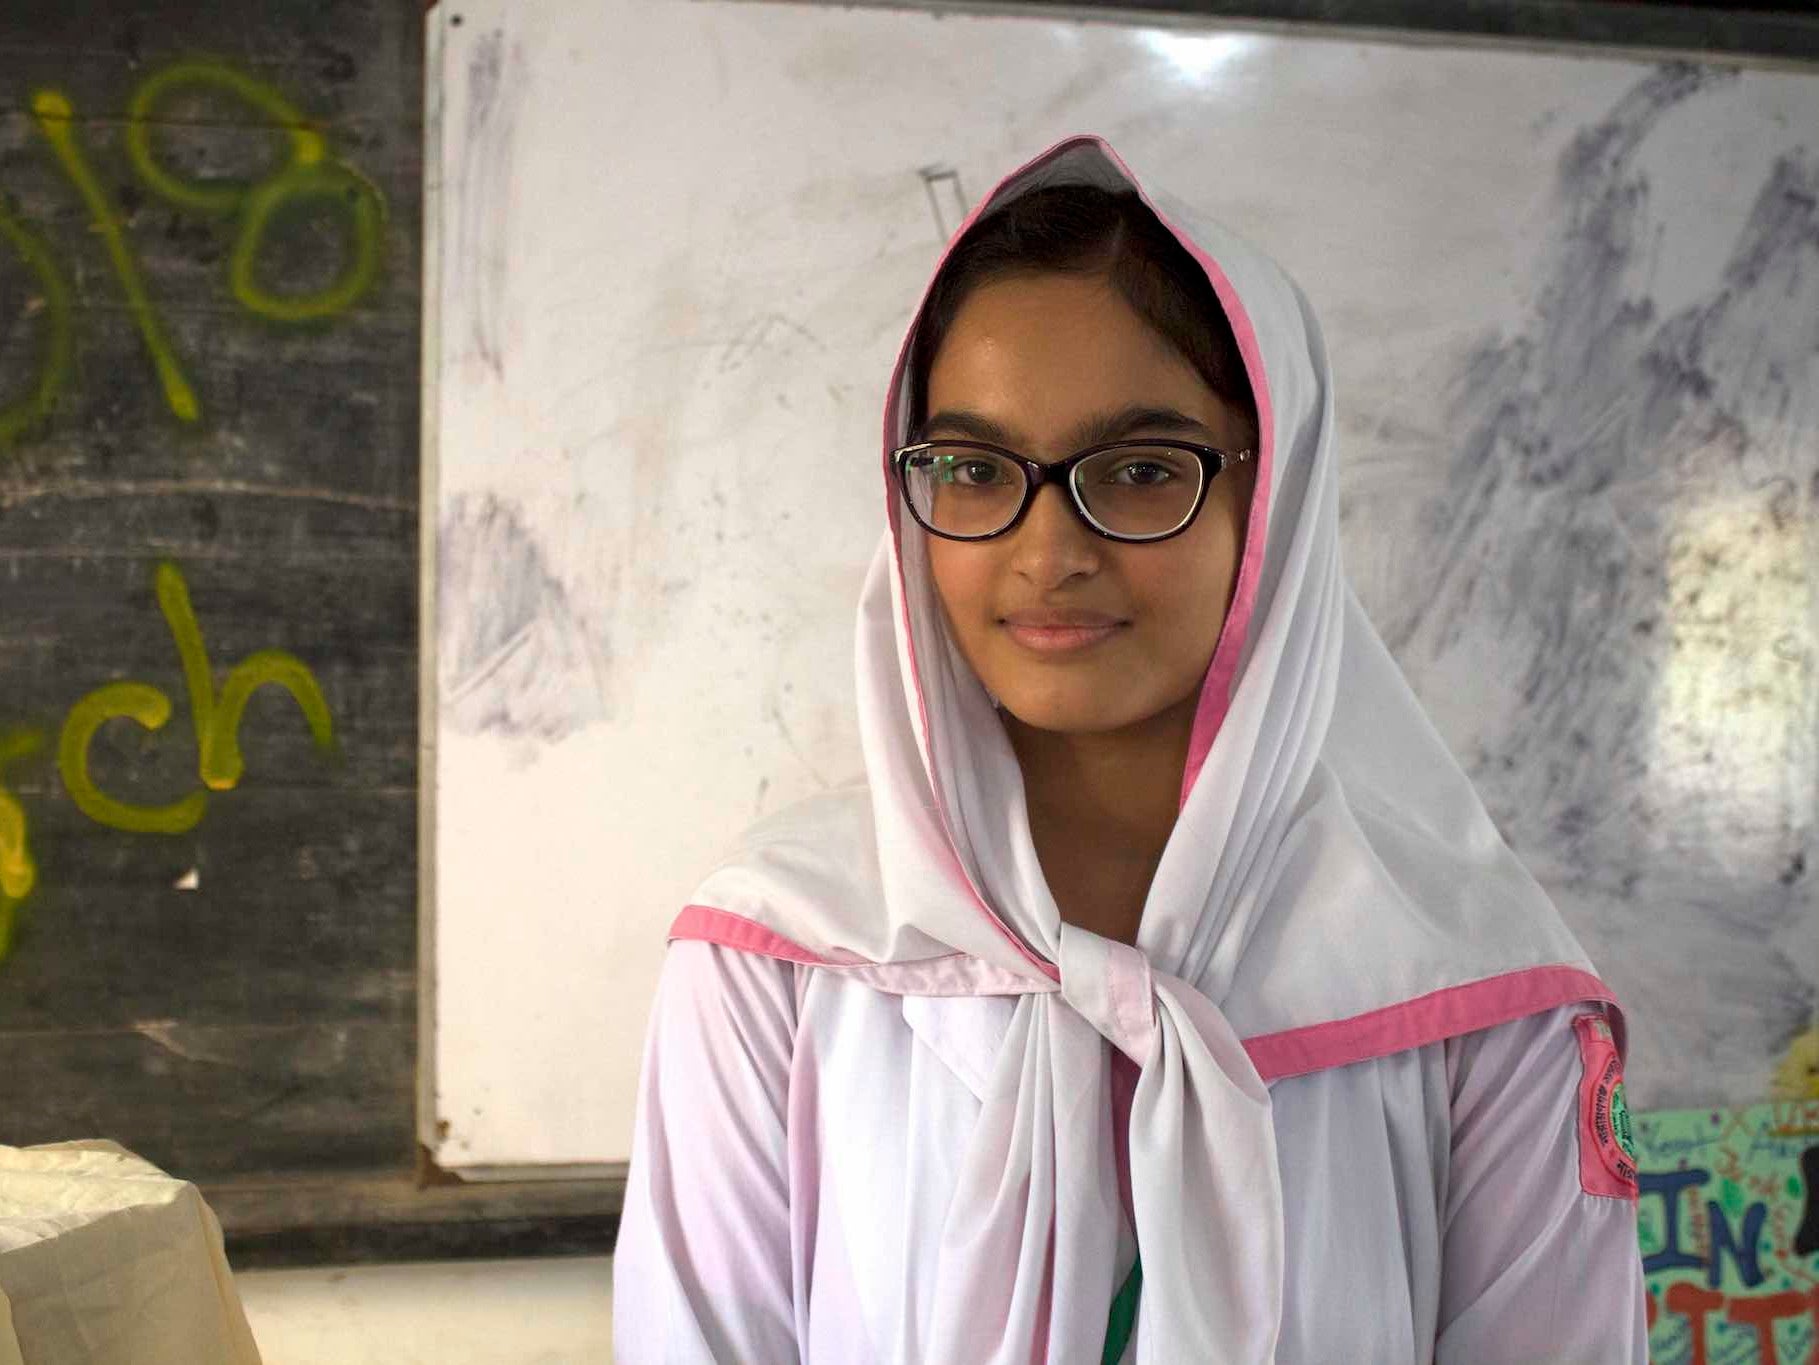 Sadika, 15, is the daughter of a businessman in Dhaka. She hopes to continue her education at university and says working on projects with a UK school has broadened her horizons